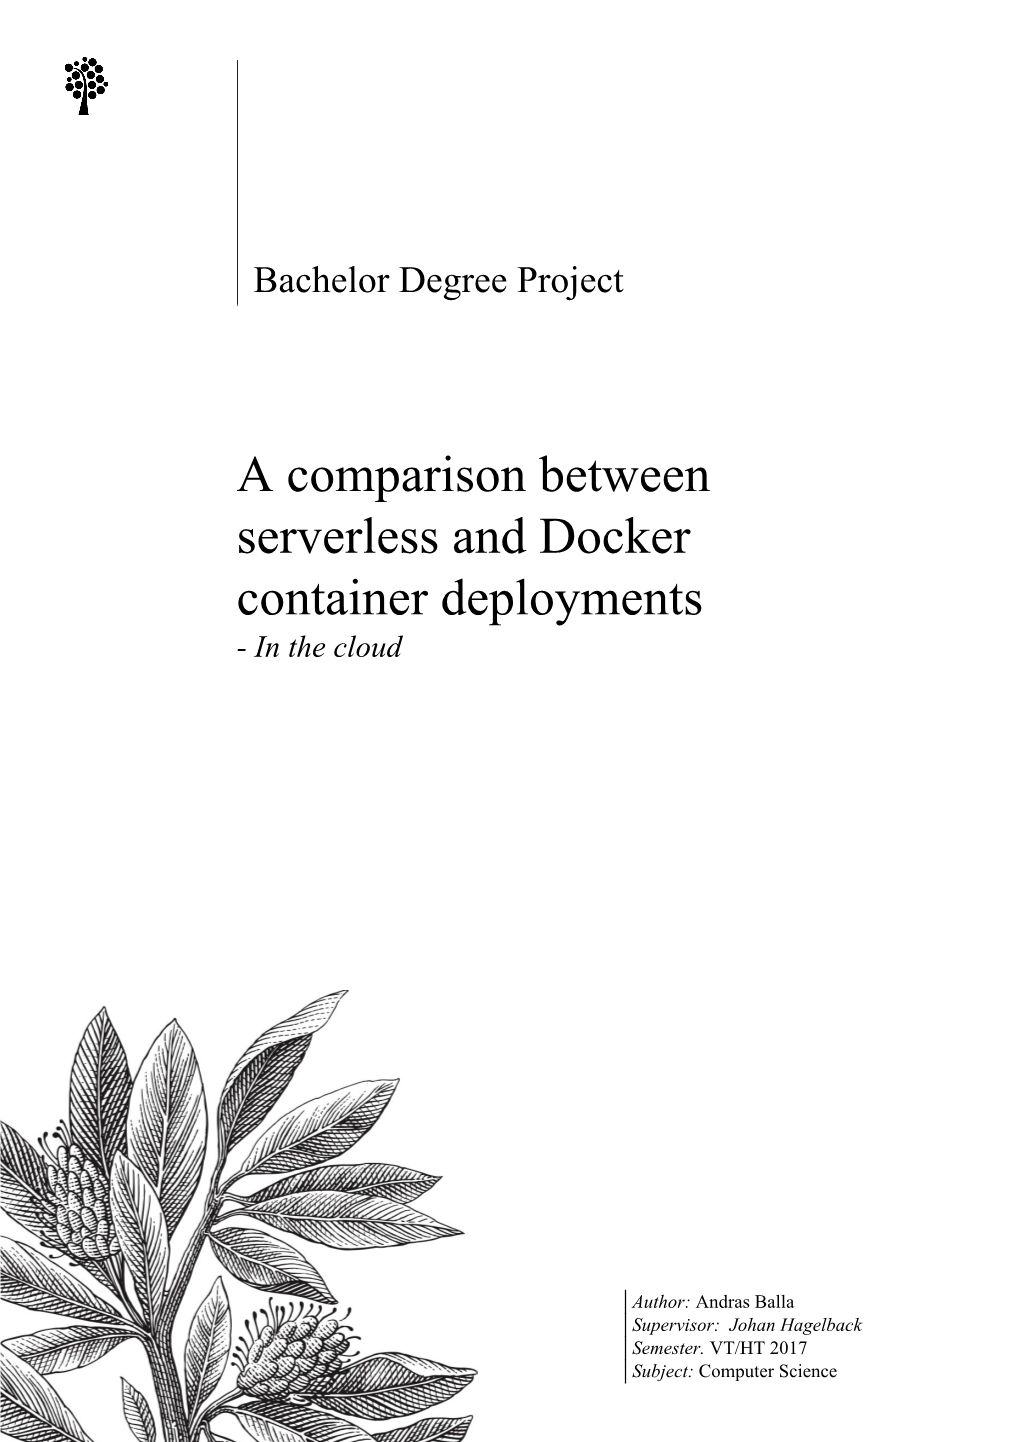 A Comparison Between Serverless and Docker Container Deployments - in the Cloud